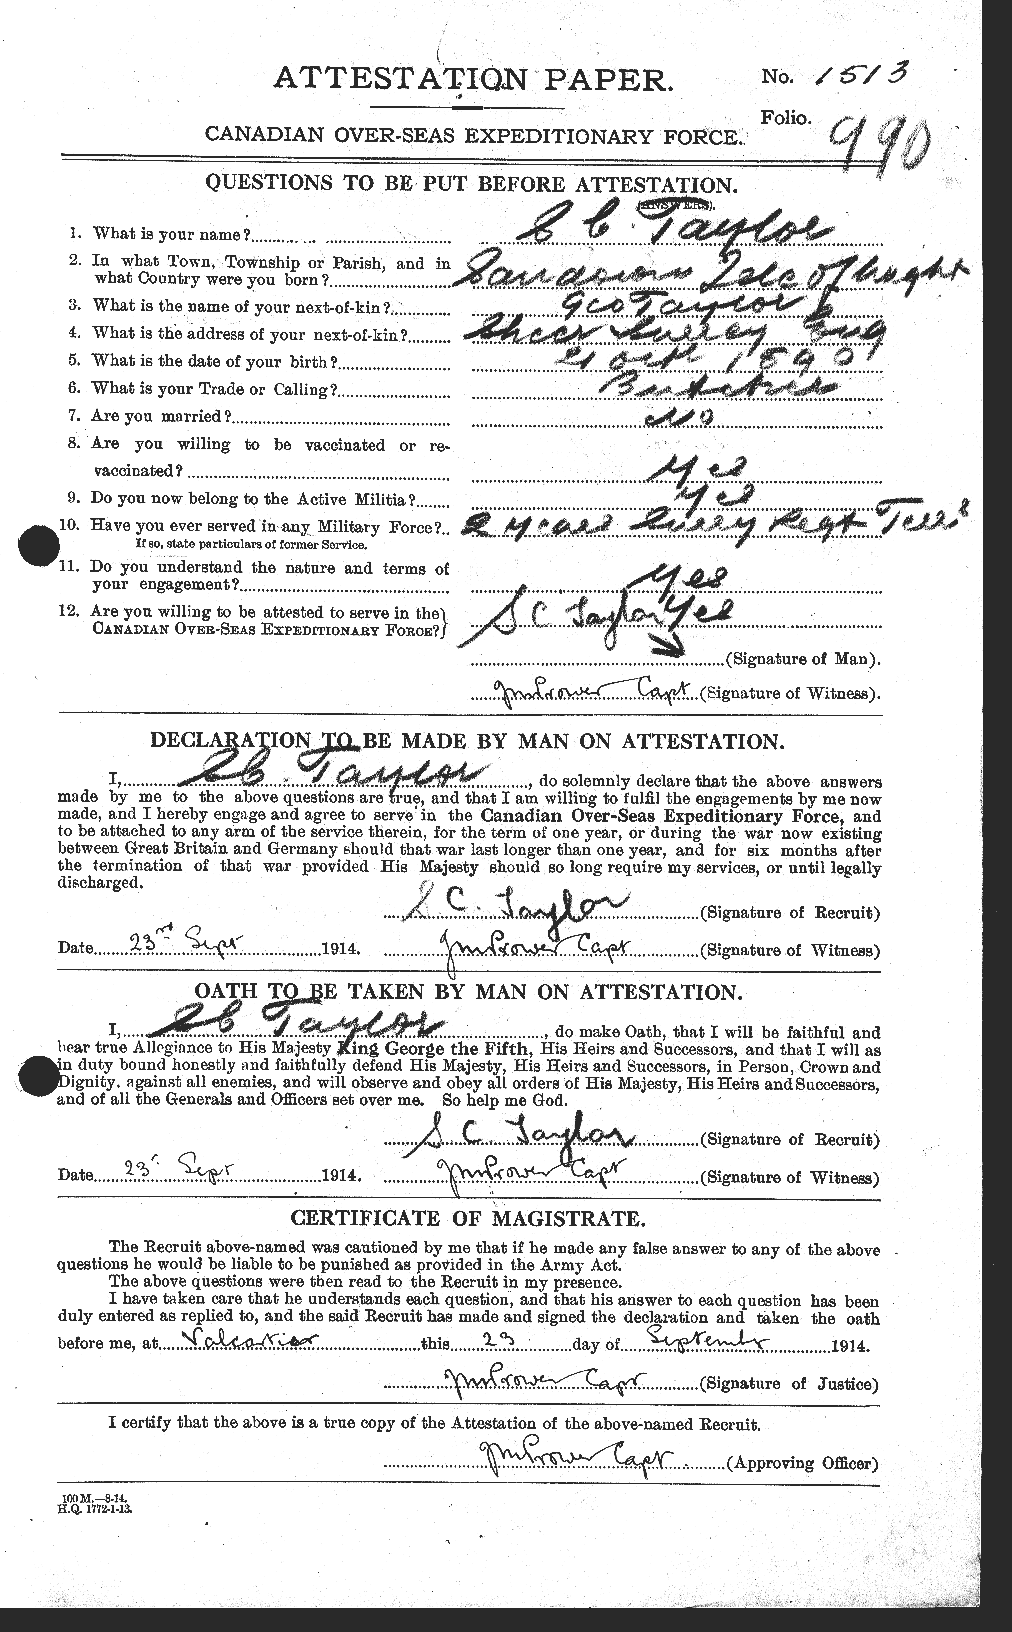 Personnel Records of the First World War - CEF 627545a